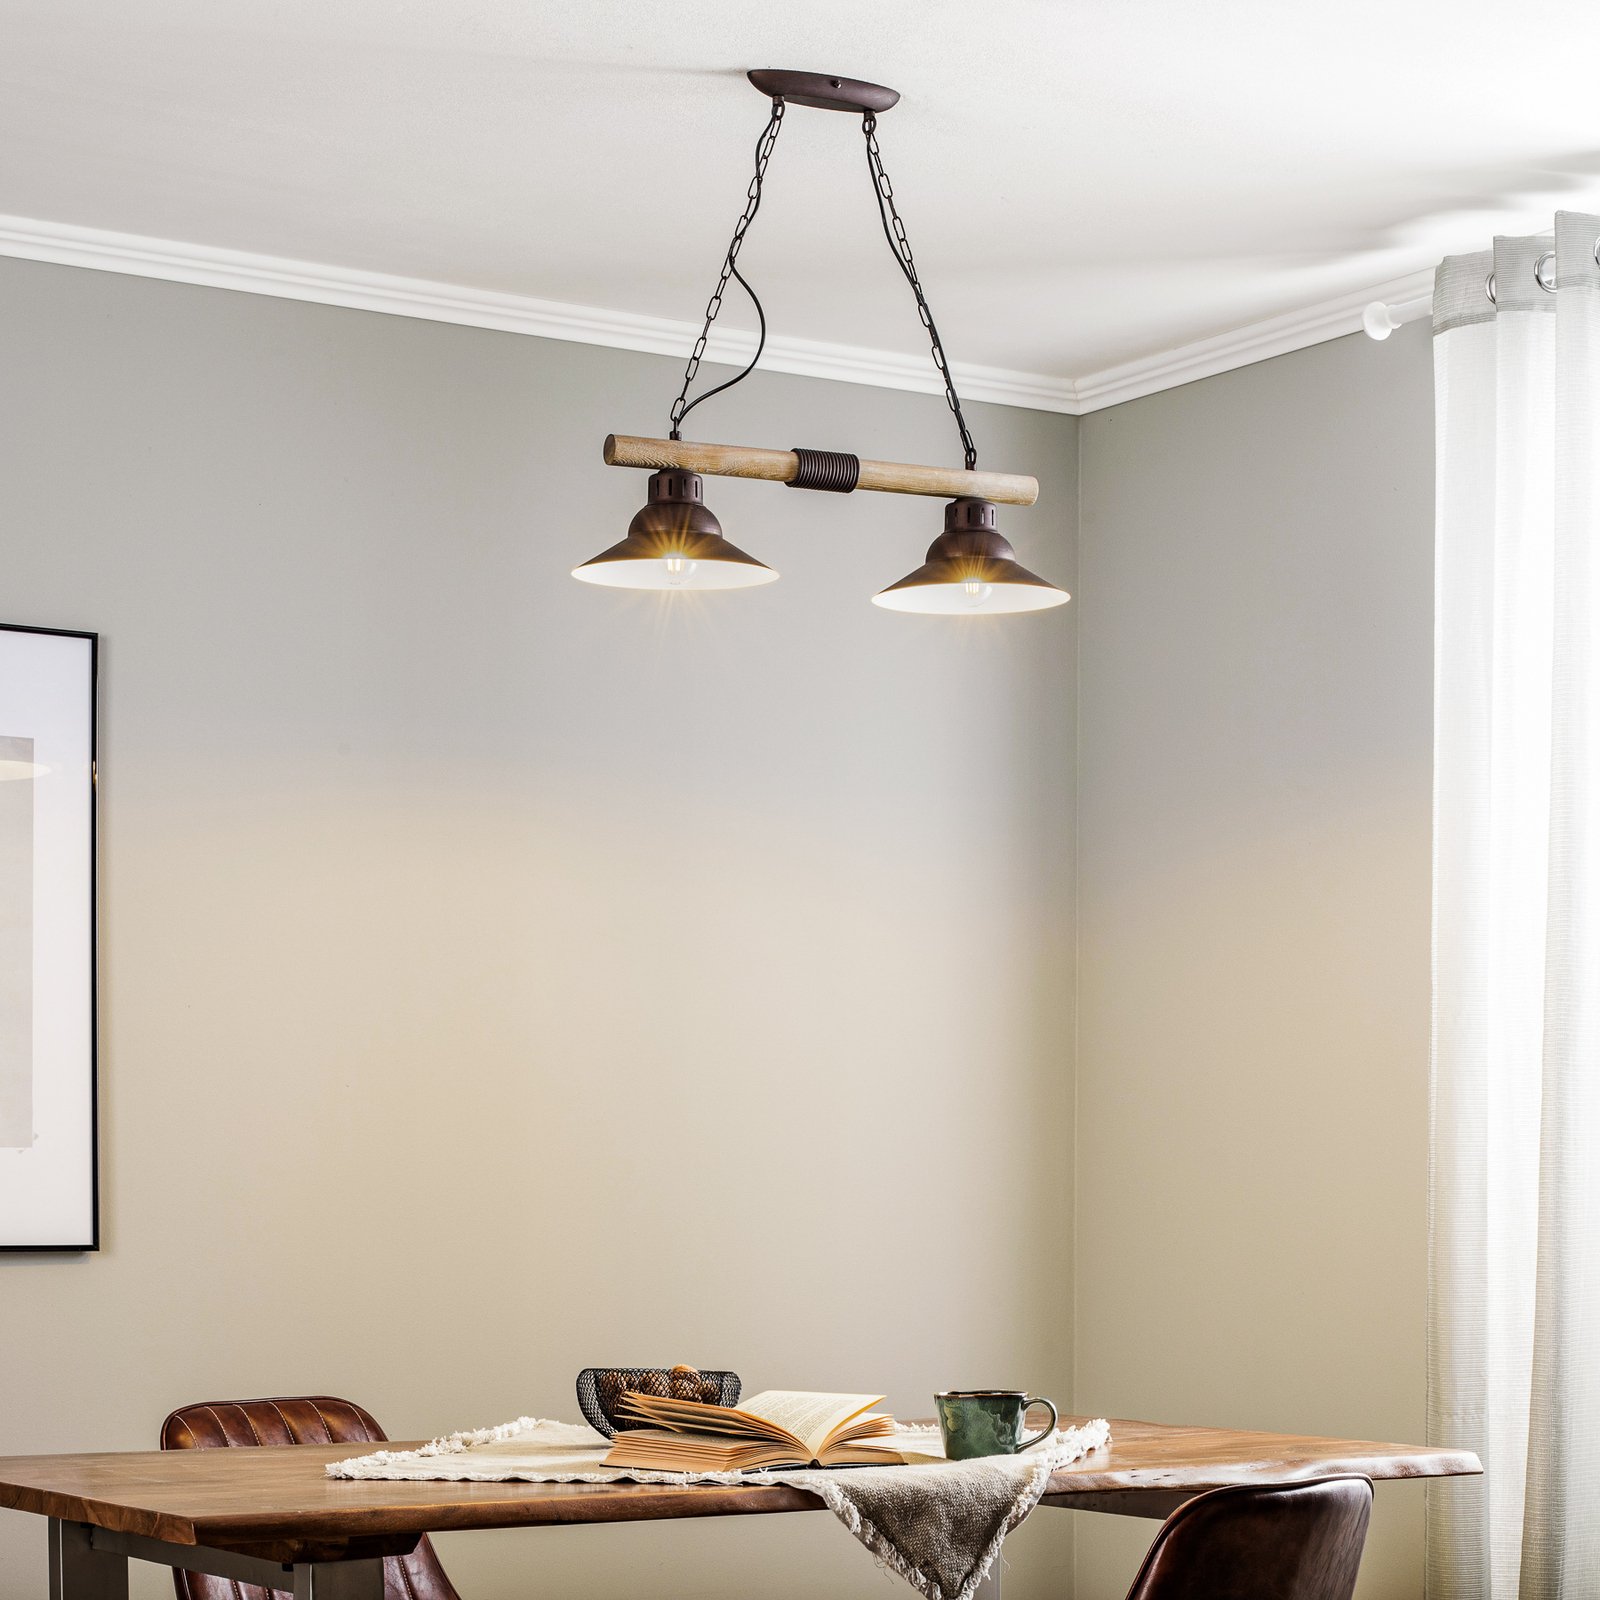 West pendant light with copper shades, 2-bulb